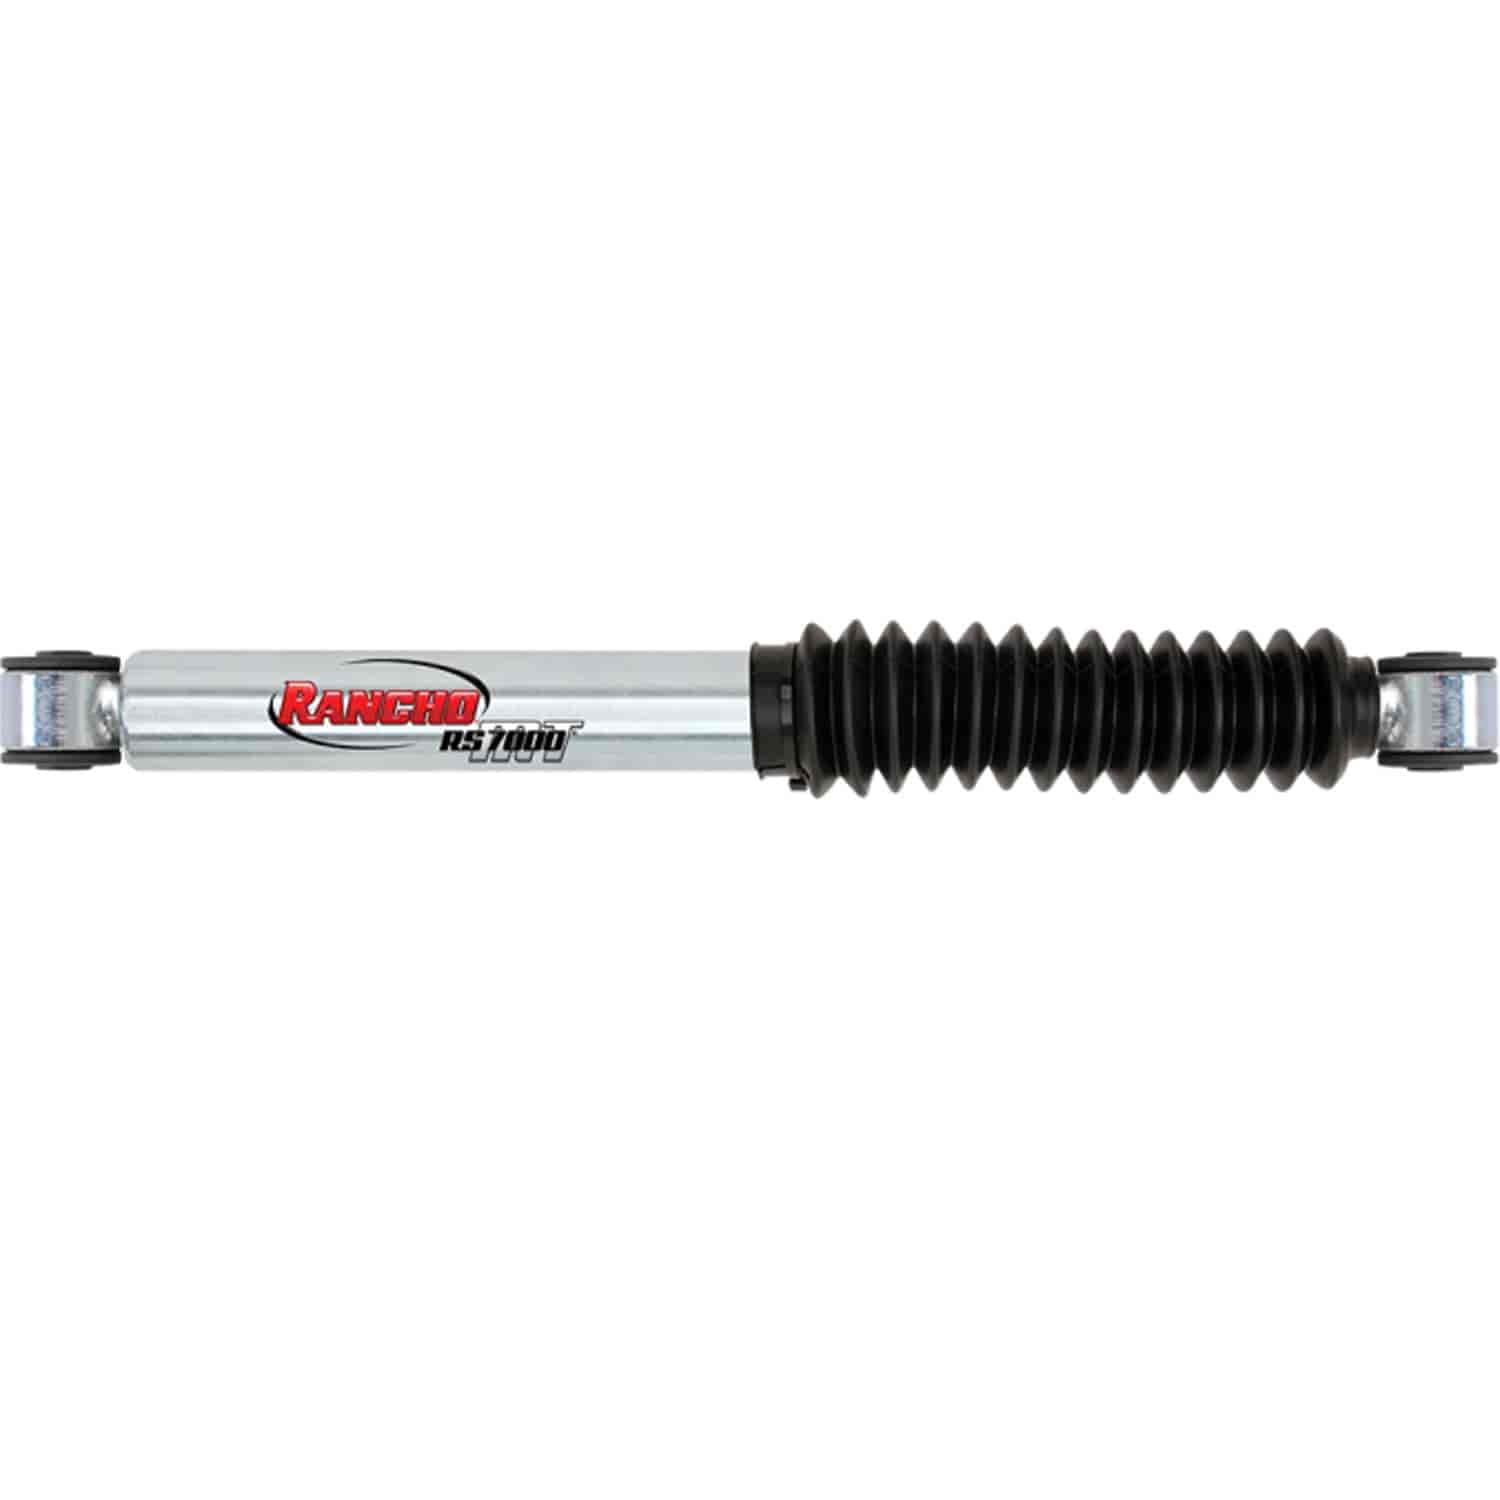 RS7000MT Front Shock Fits GM full size SUVs and Pickups